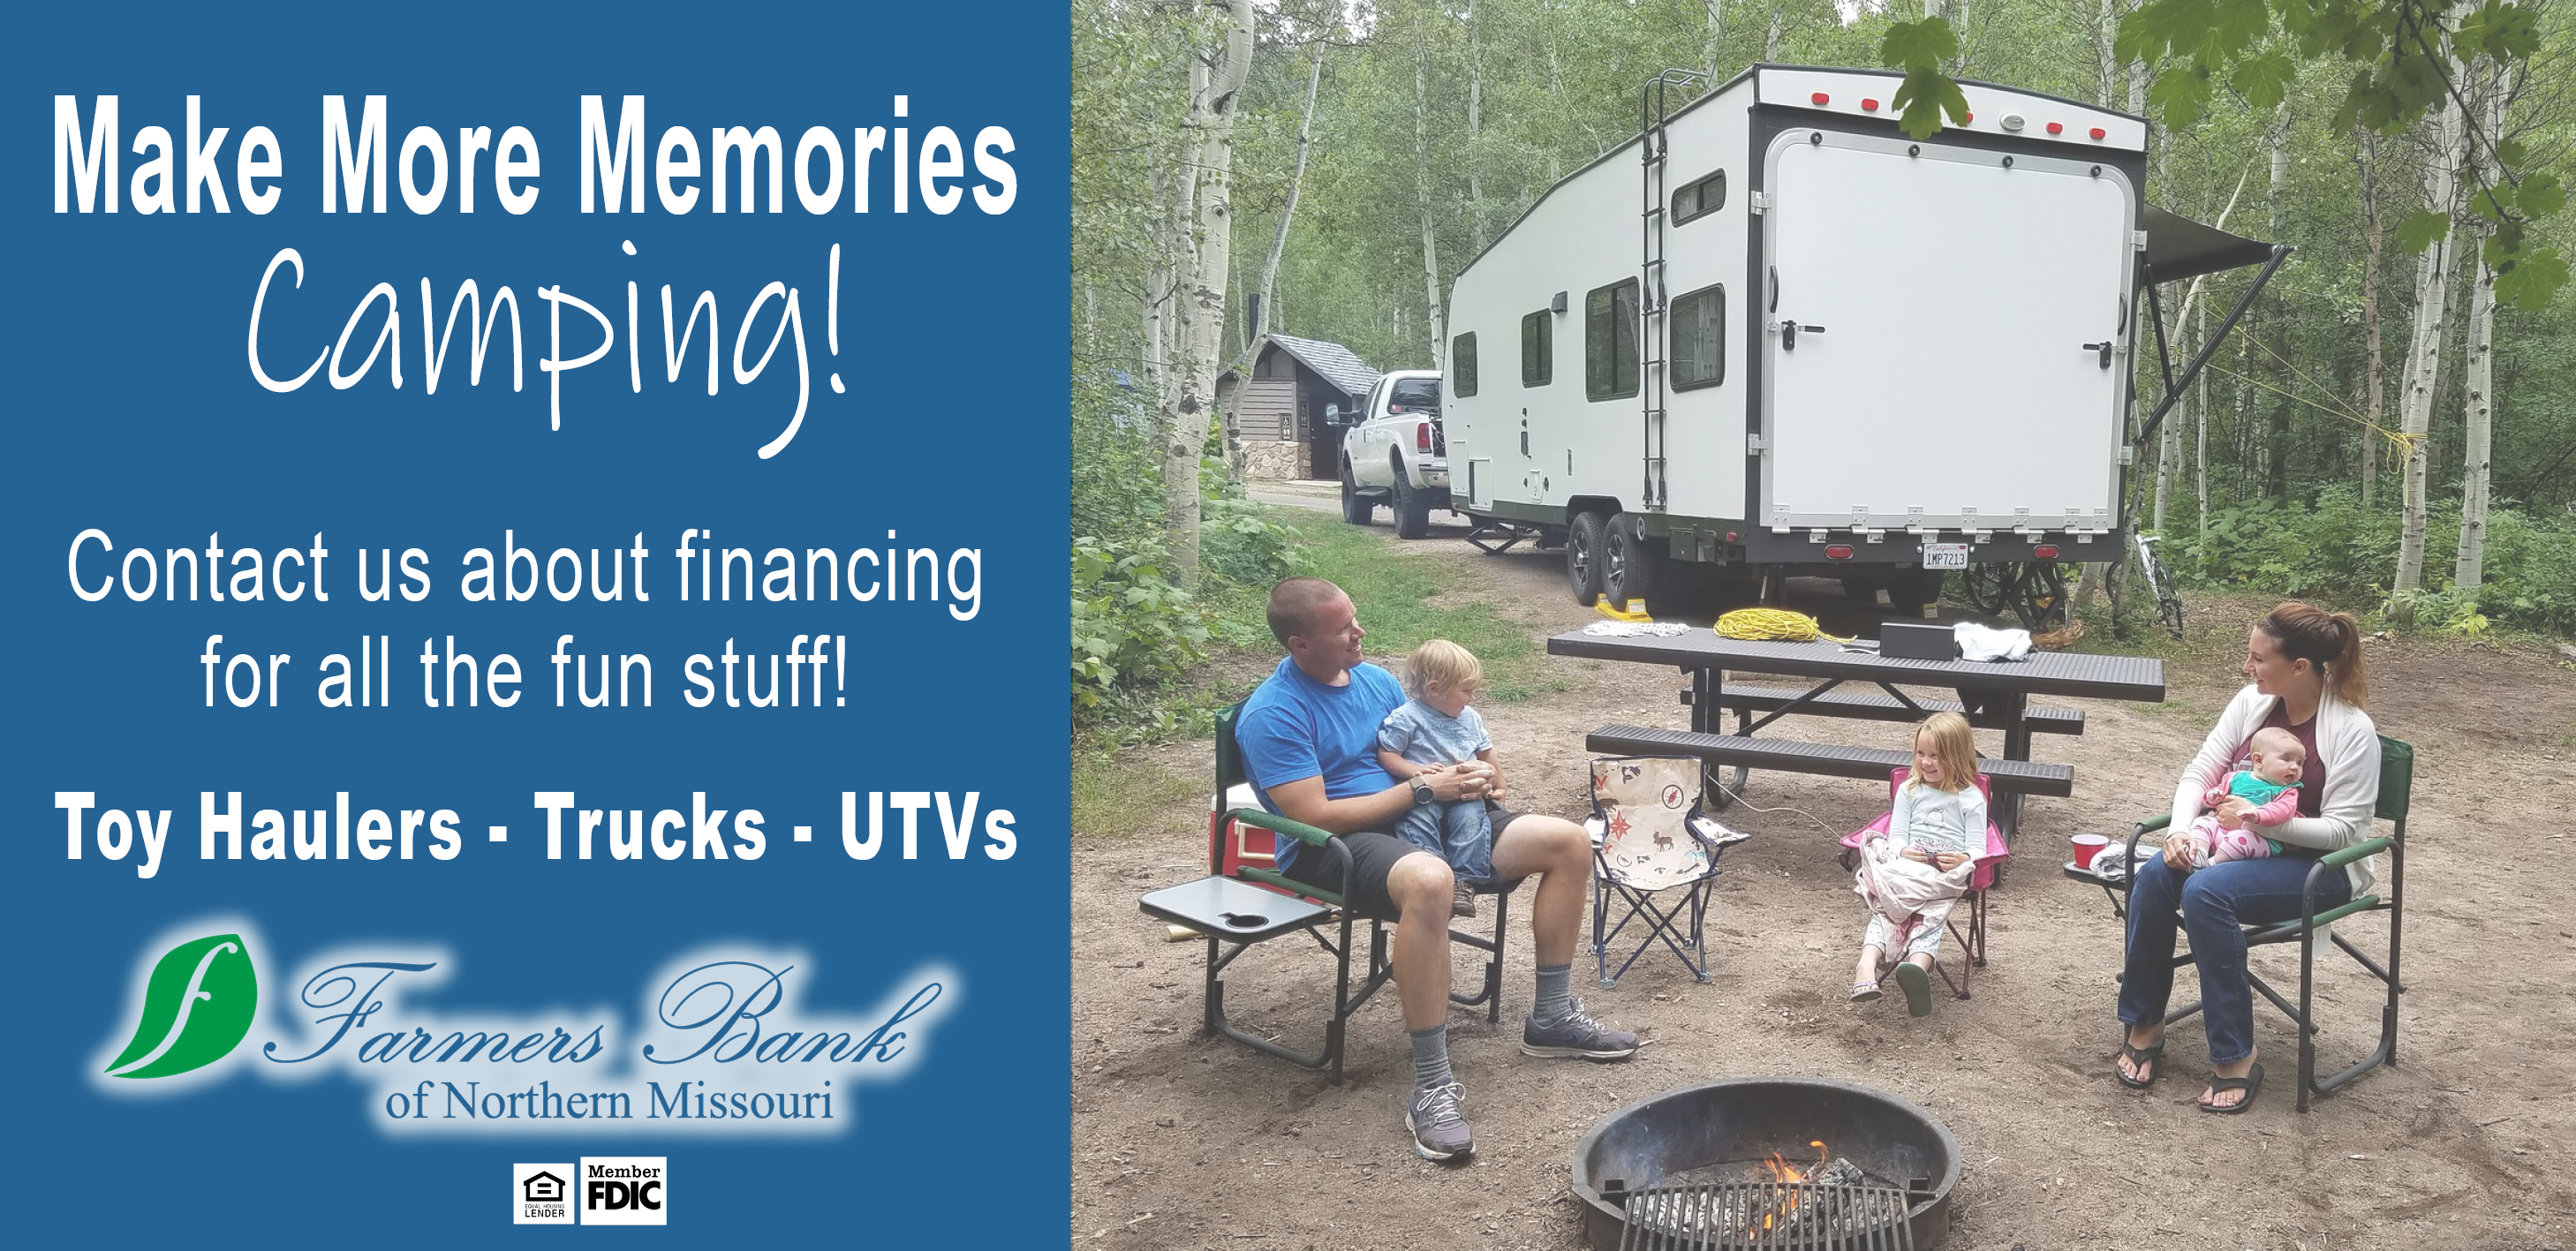 Make more memories camping. Contact us about financing for all the fun stuff. Toy haulers, trucks, UTVs. Farmers Bank of Northern Missouri, Member FDIC, Equal Housing Lender